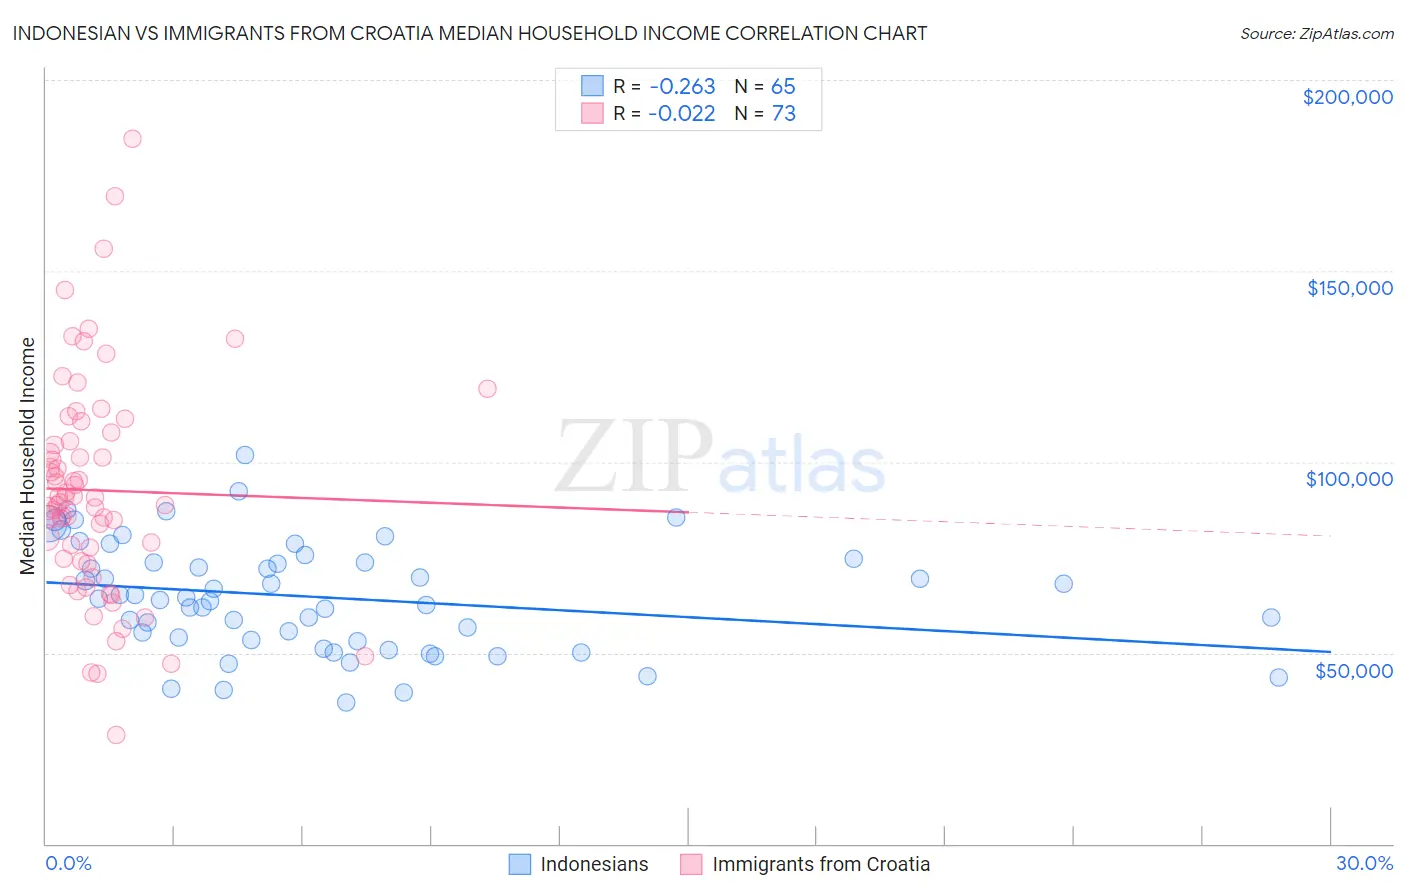 Indonesian vs Immigrants from Croatia Median Household Income